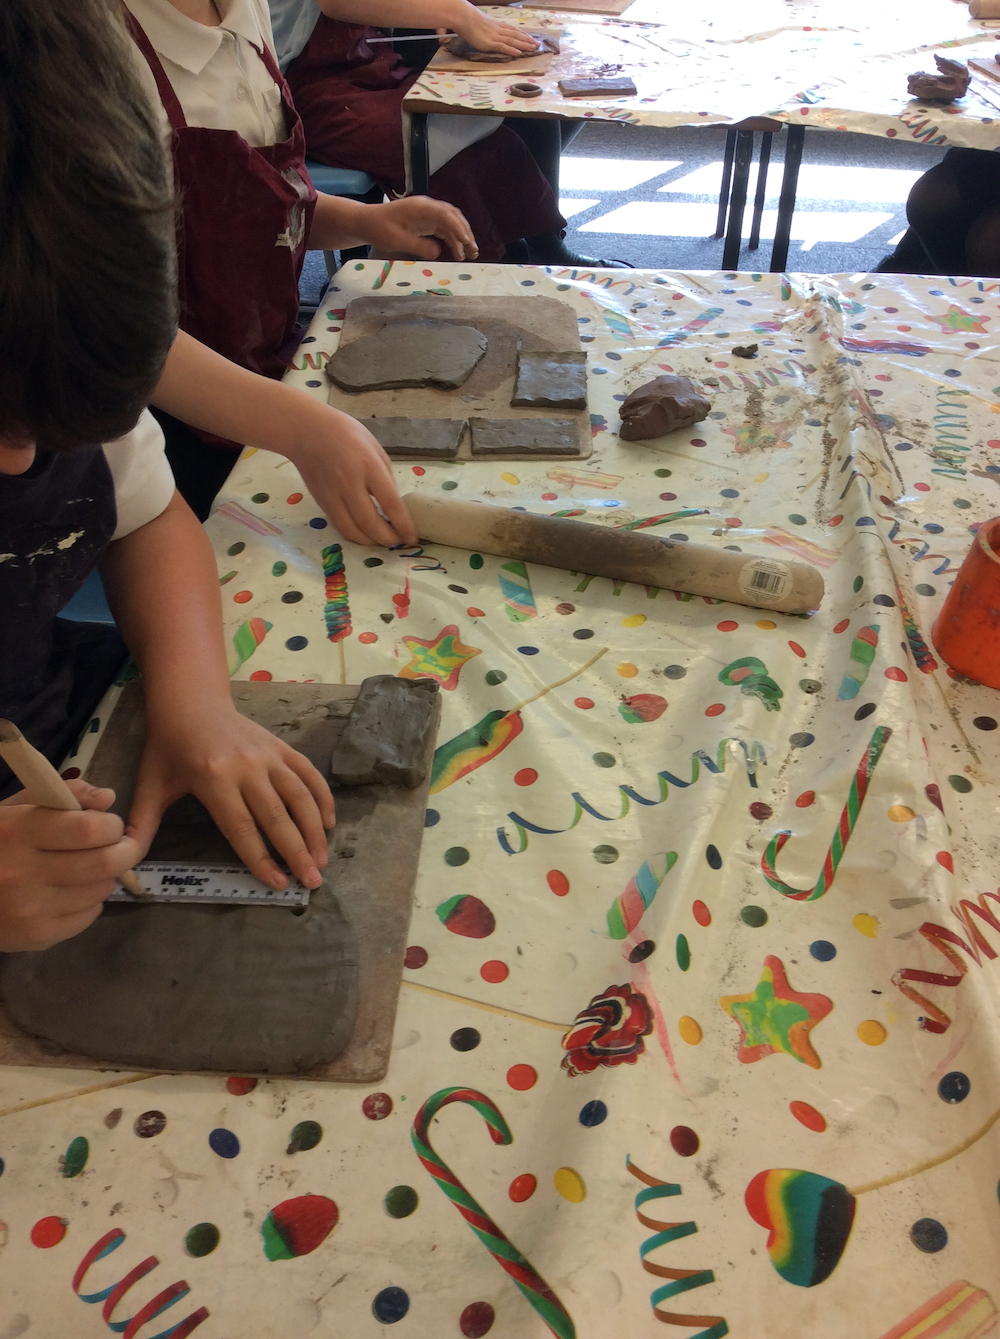 Year six pupils make memory boxes out of clay